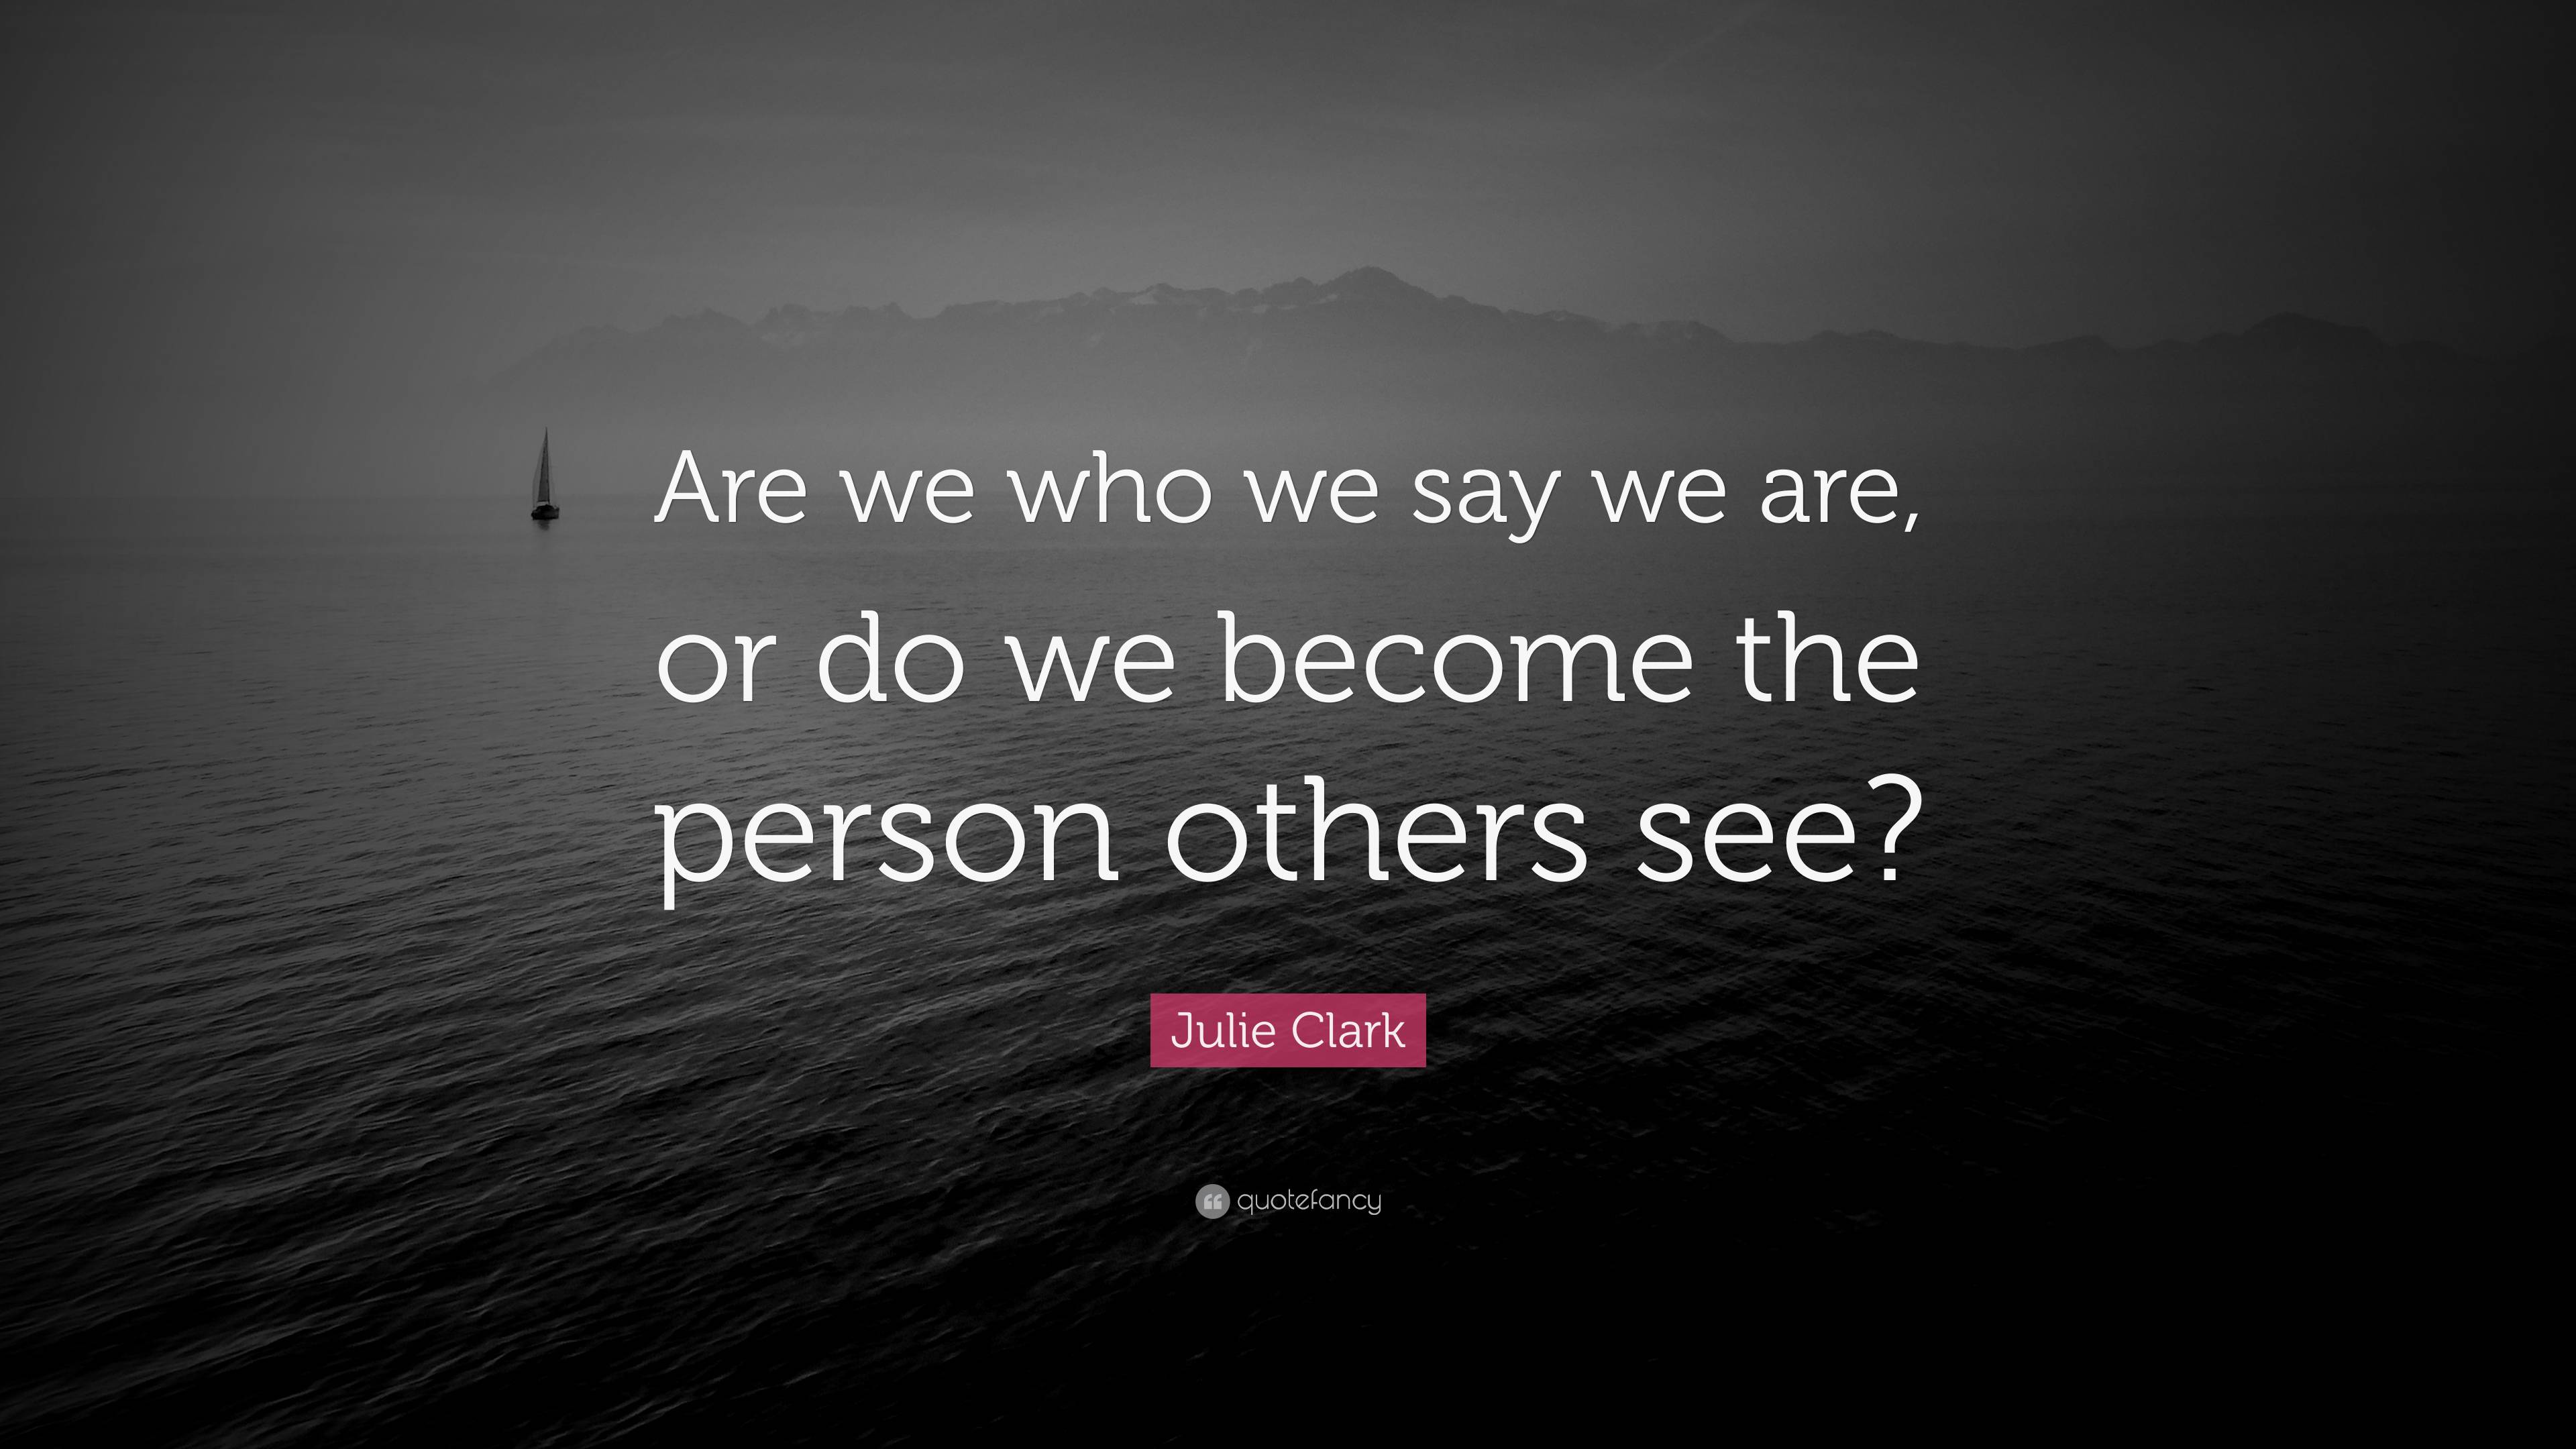 Julie Clark Quote: “Are we who we say we are, or do we become the ...